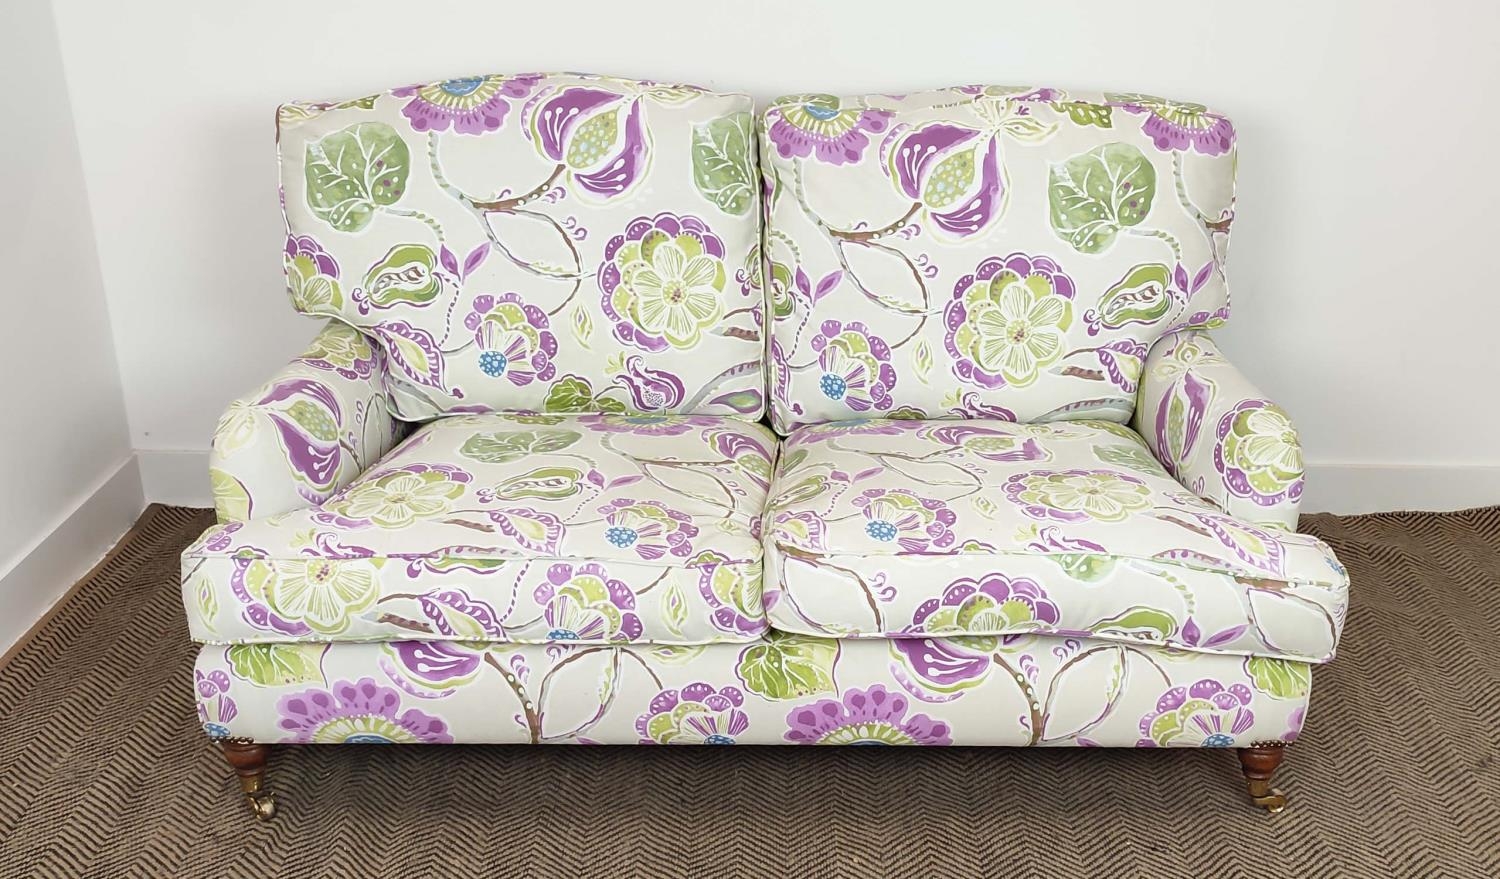 SOFA, purple and green floral patterned on brass castors, 90cm H x 160cm W.